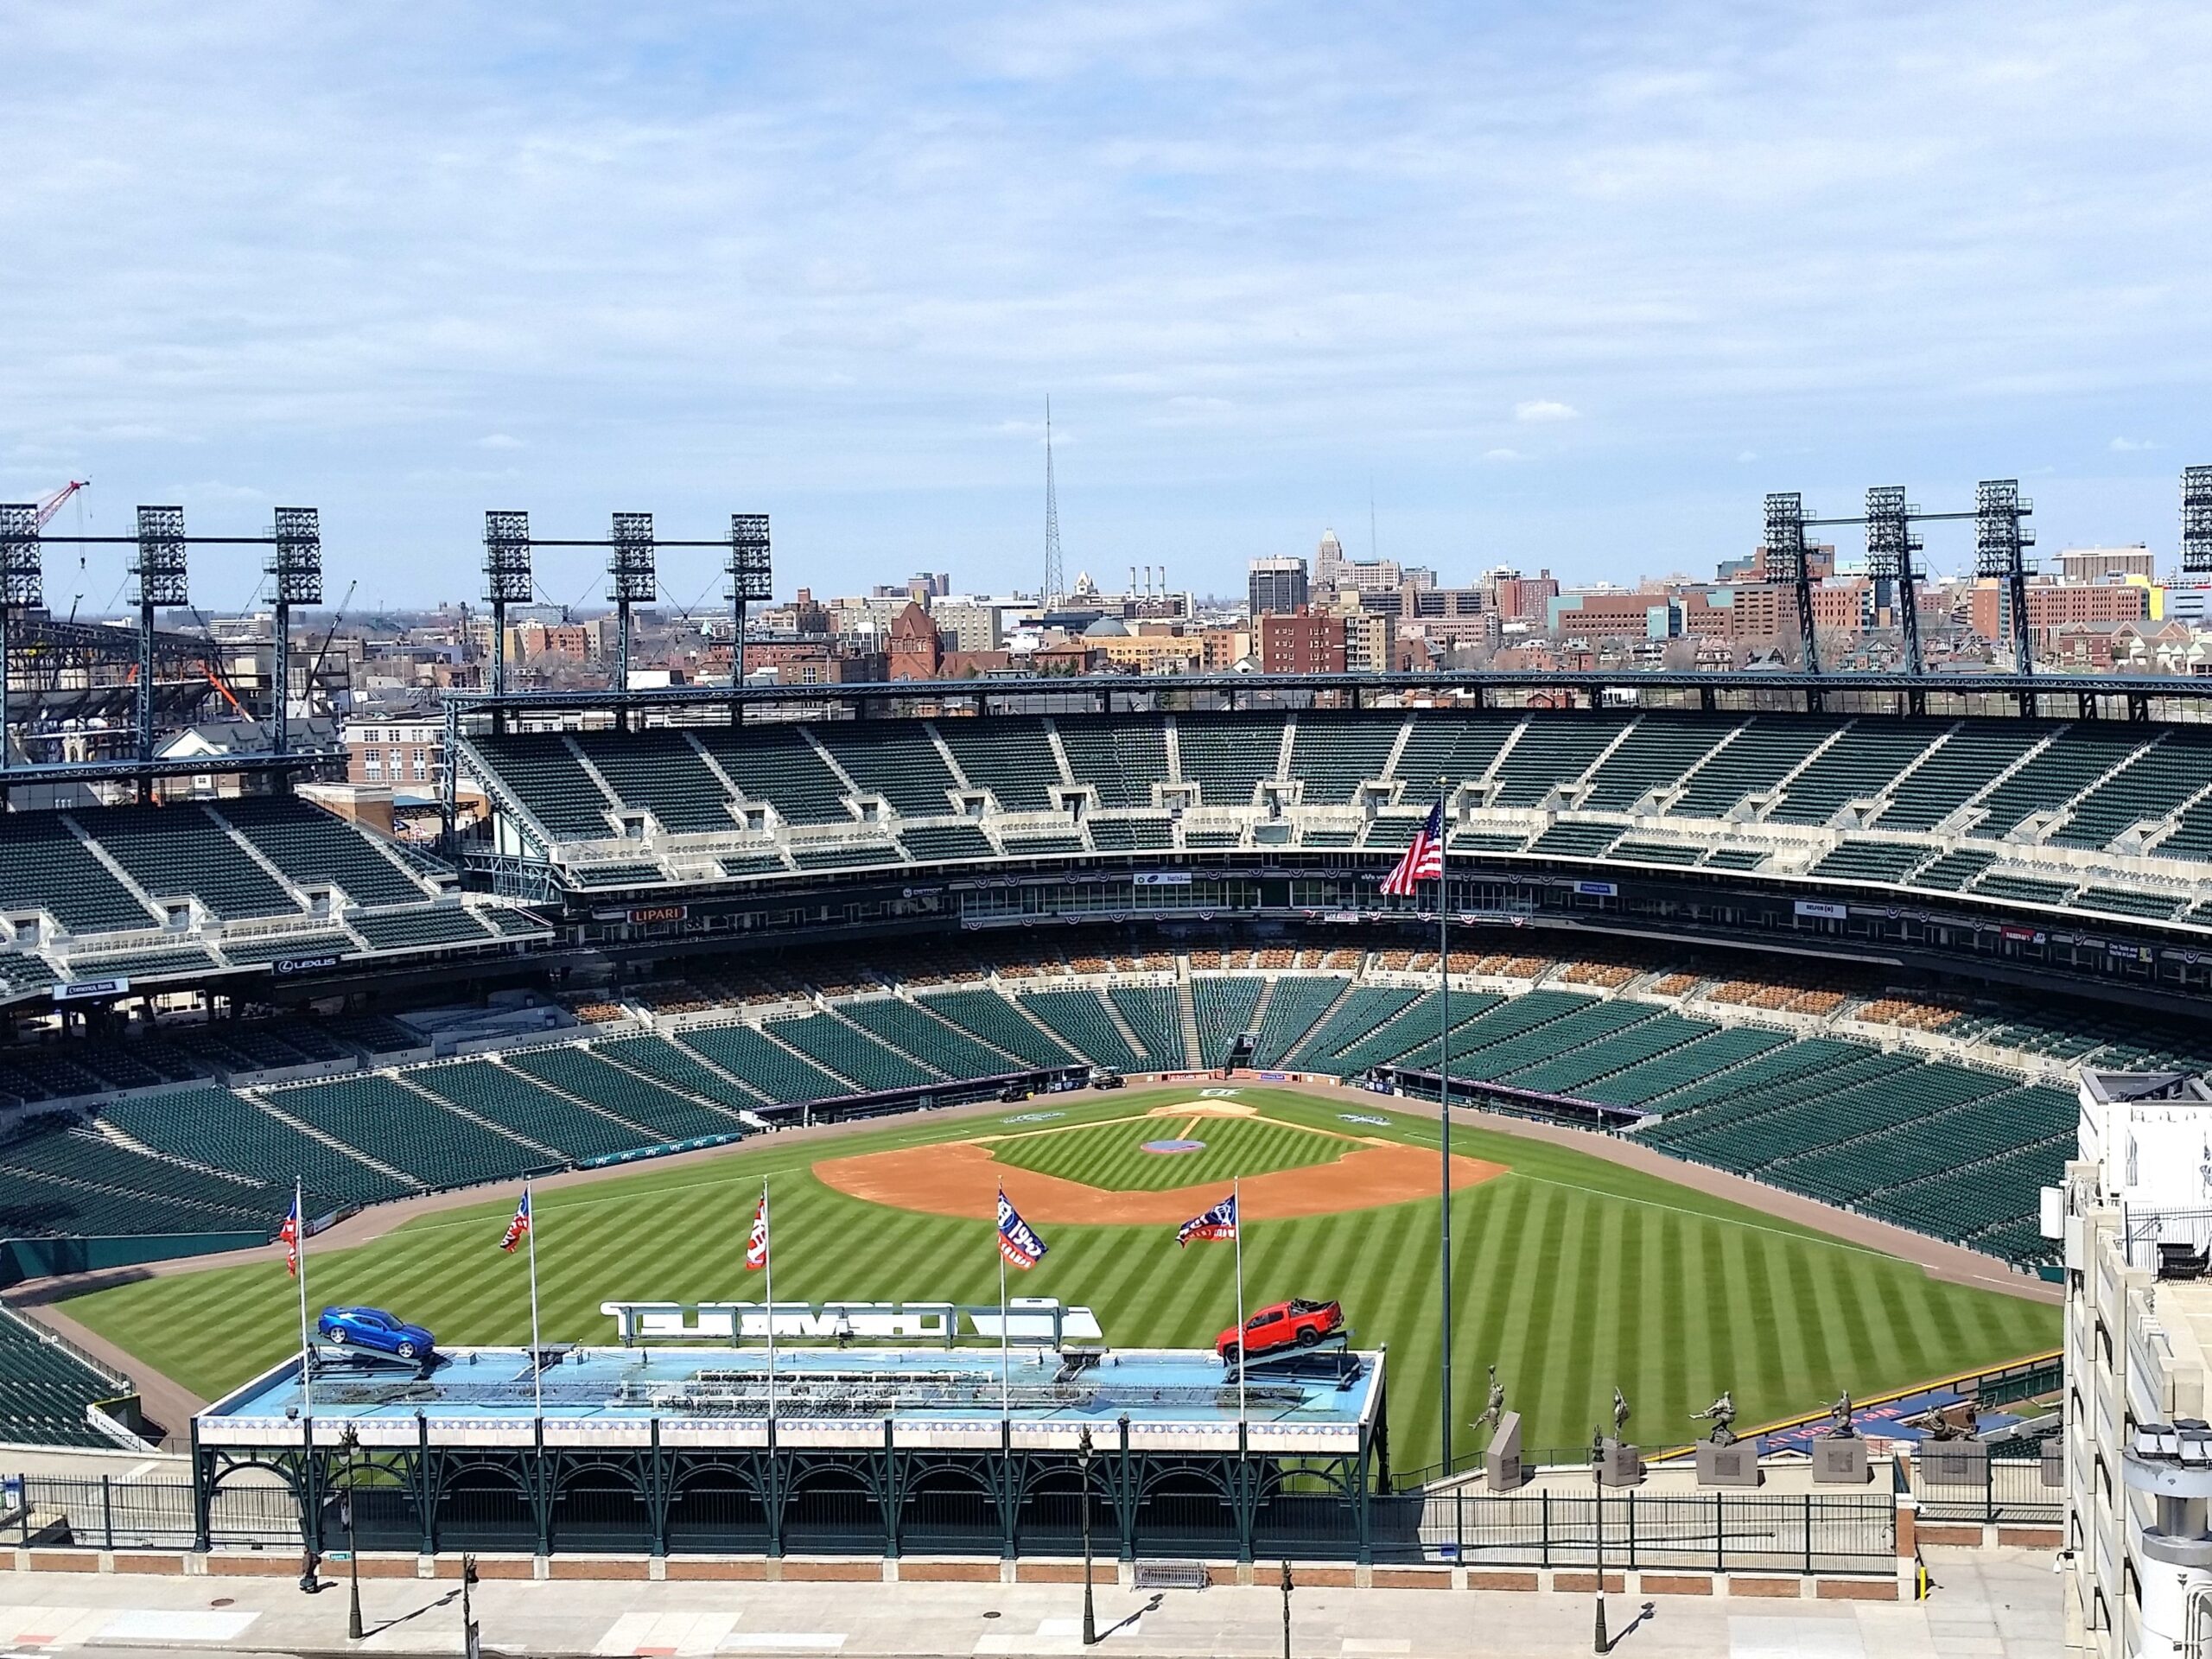 Do you want to hit some balls at Comerica Park? - Buy Michigan Now